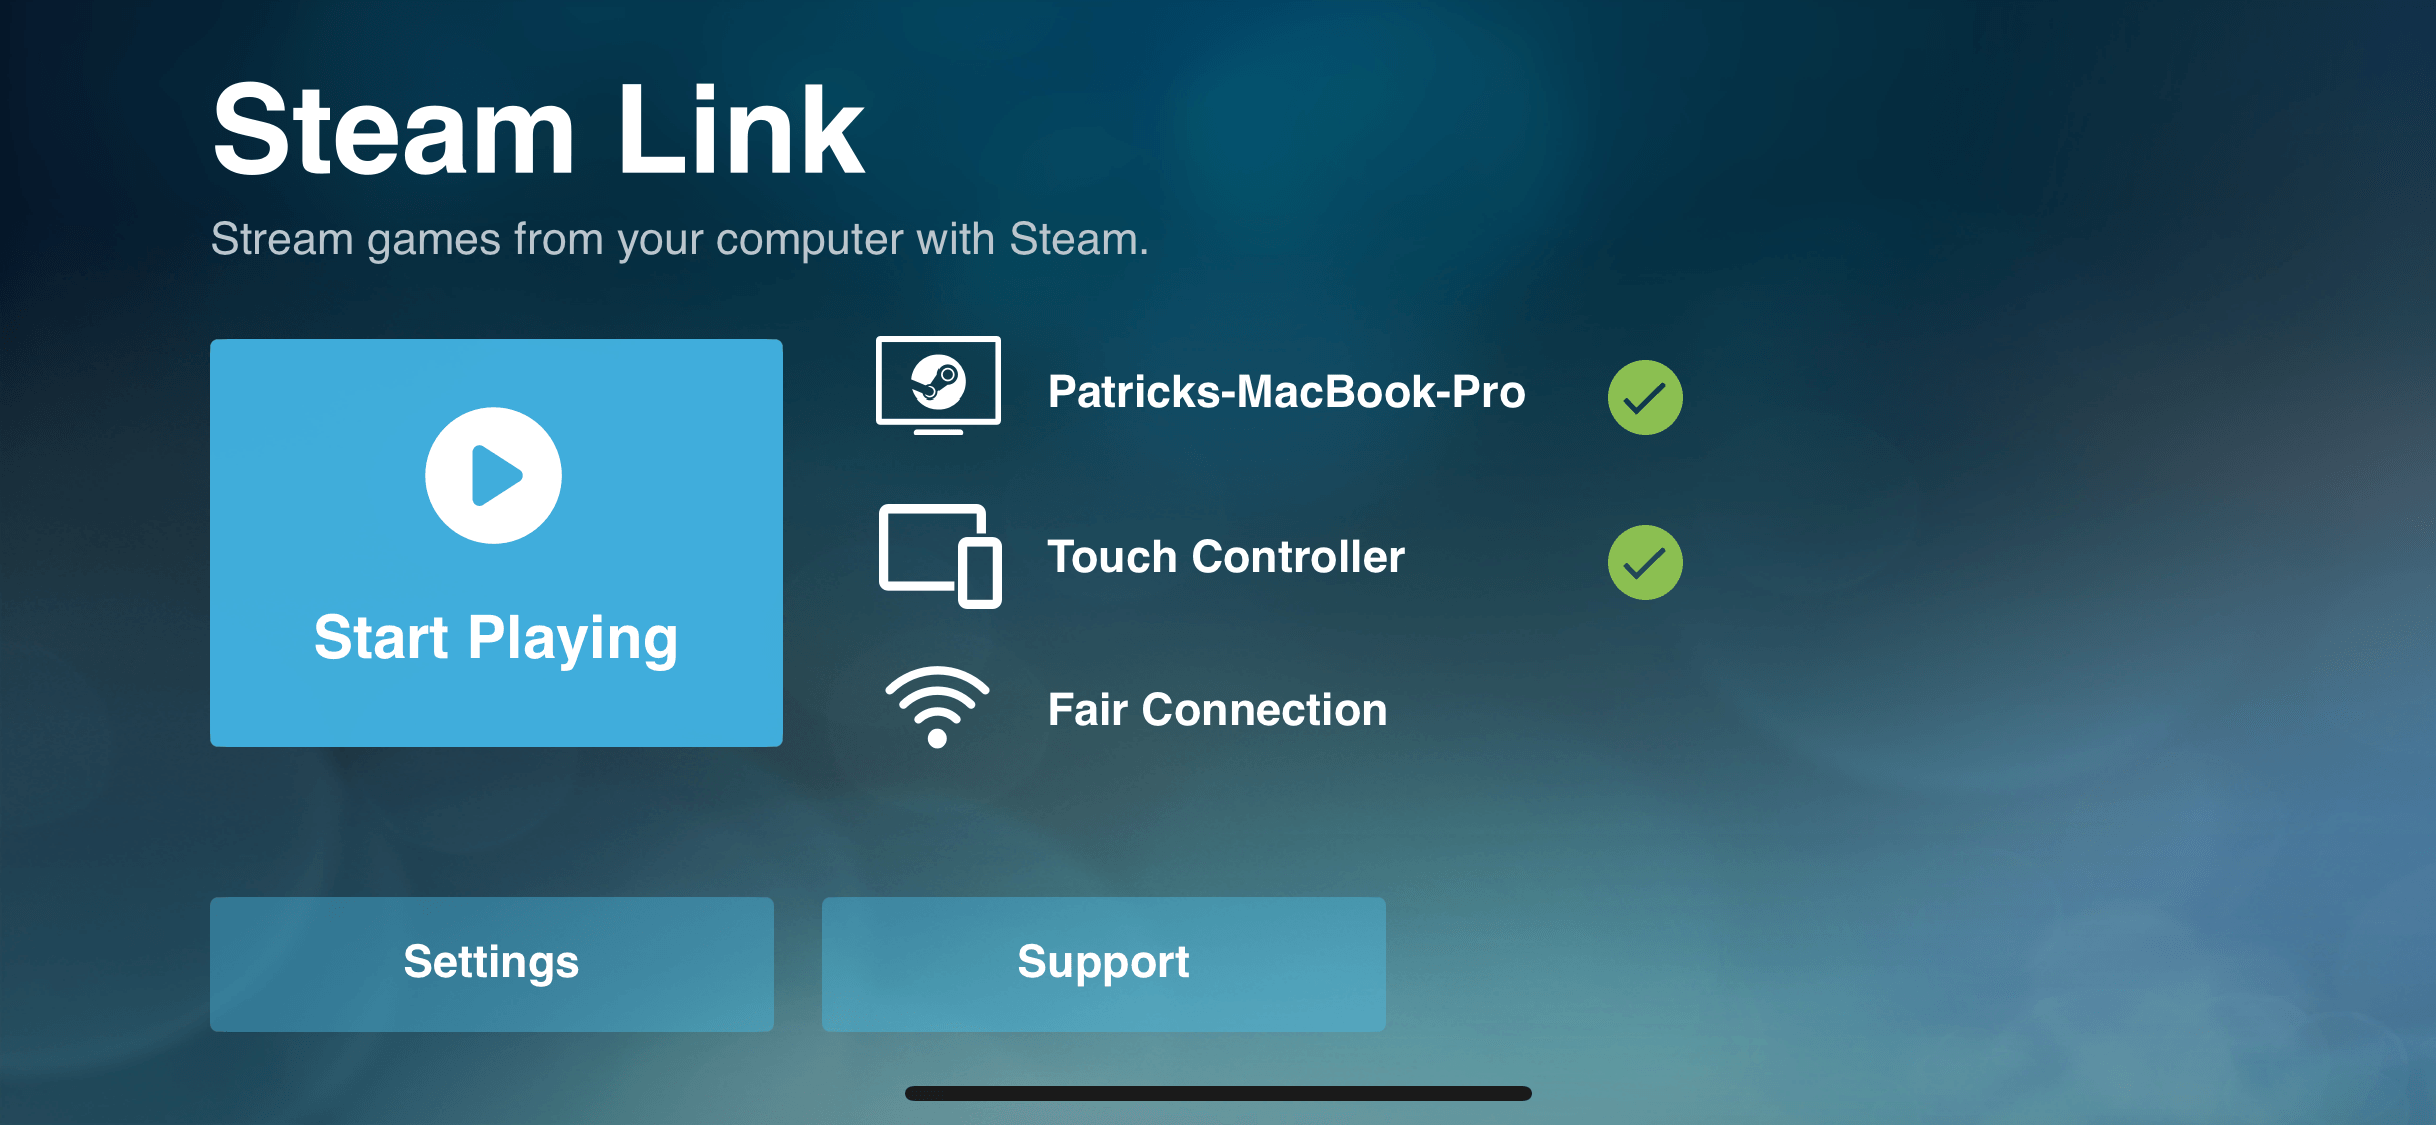 How to Set up a Steam Link Device in 6 Simple Steps